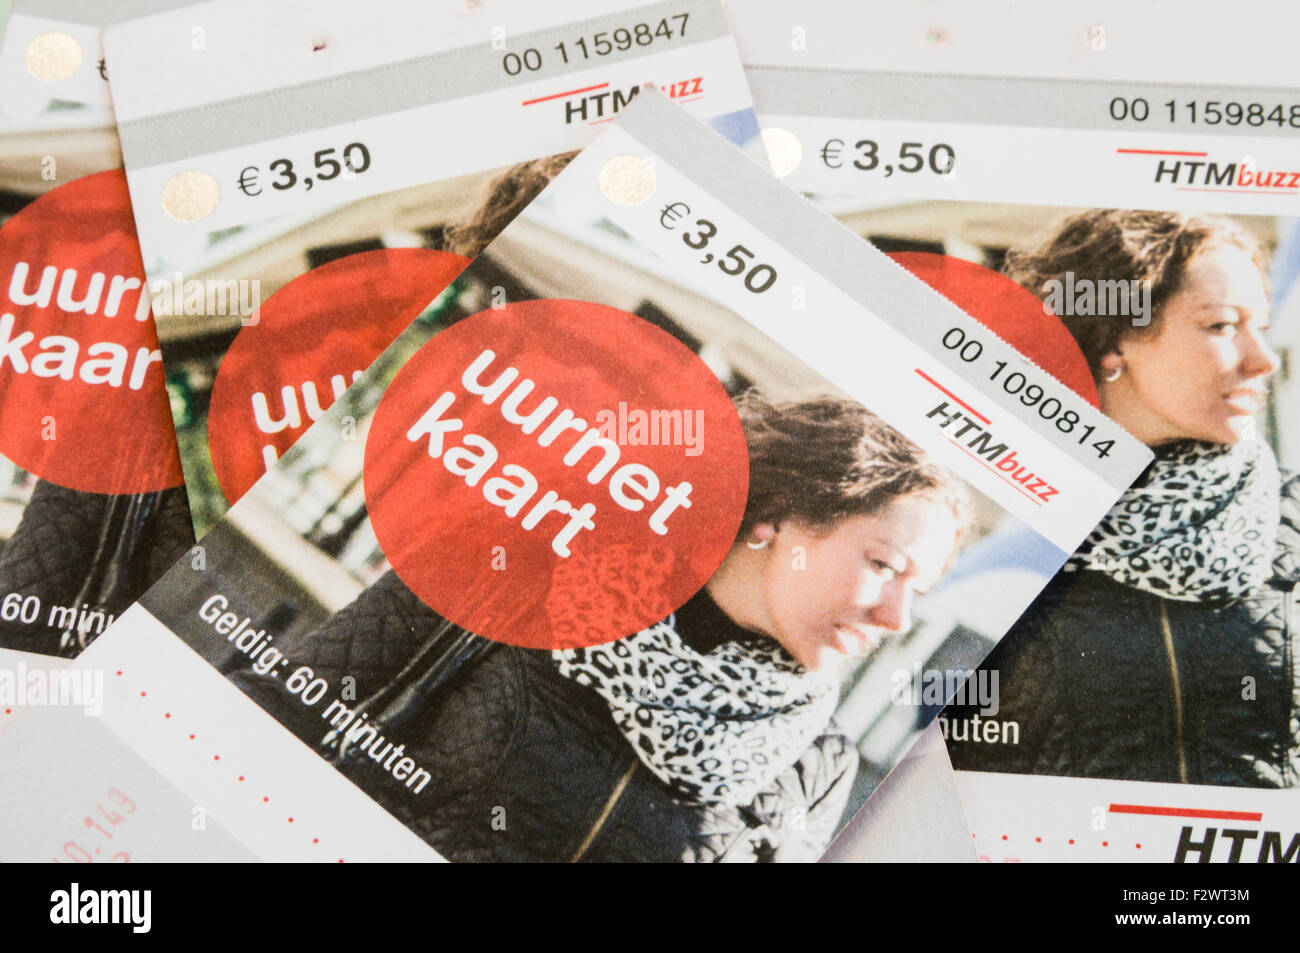 One hour tram tickets for the HTMbuzz bus in The Hague, Netherlands Stock Photo